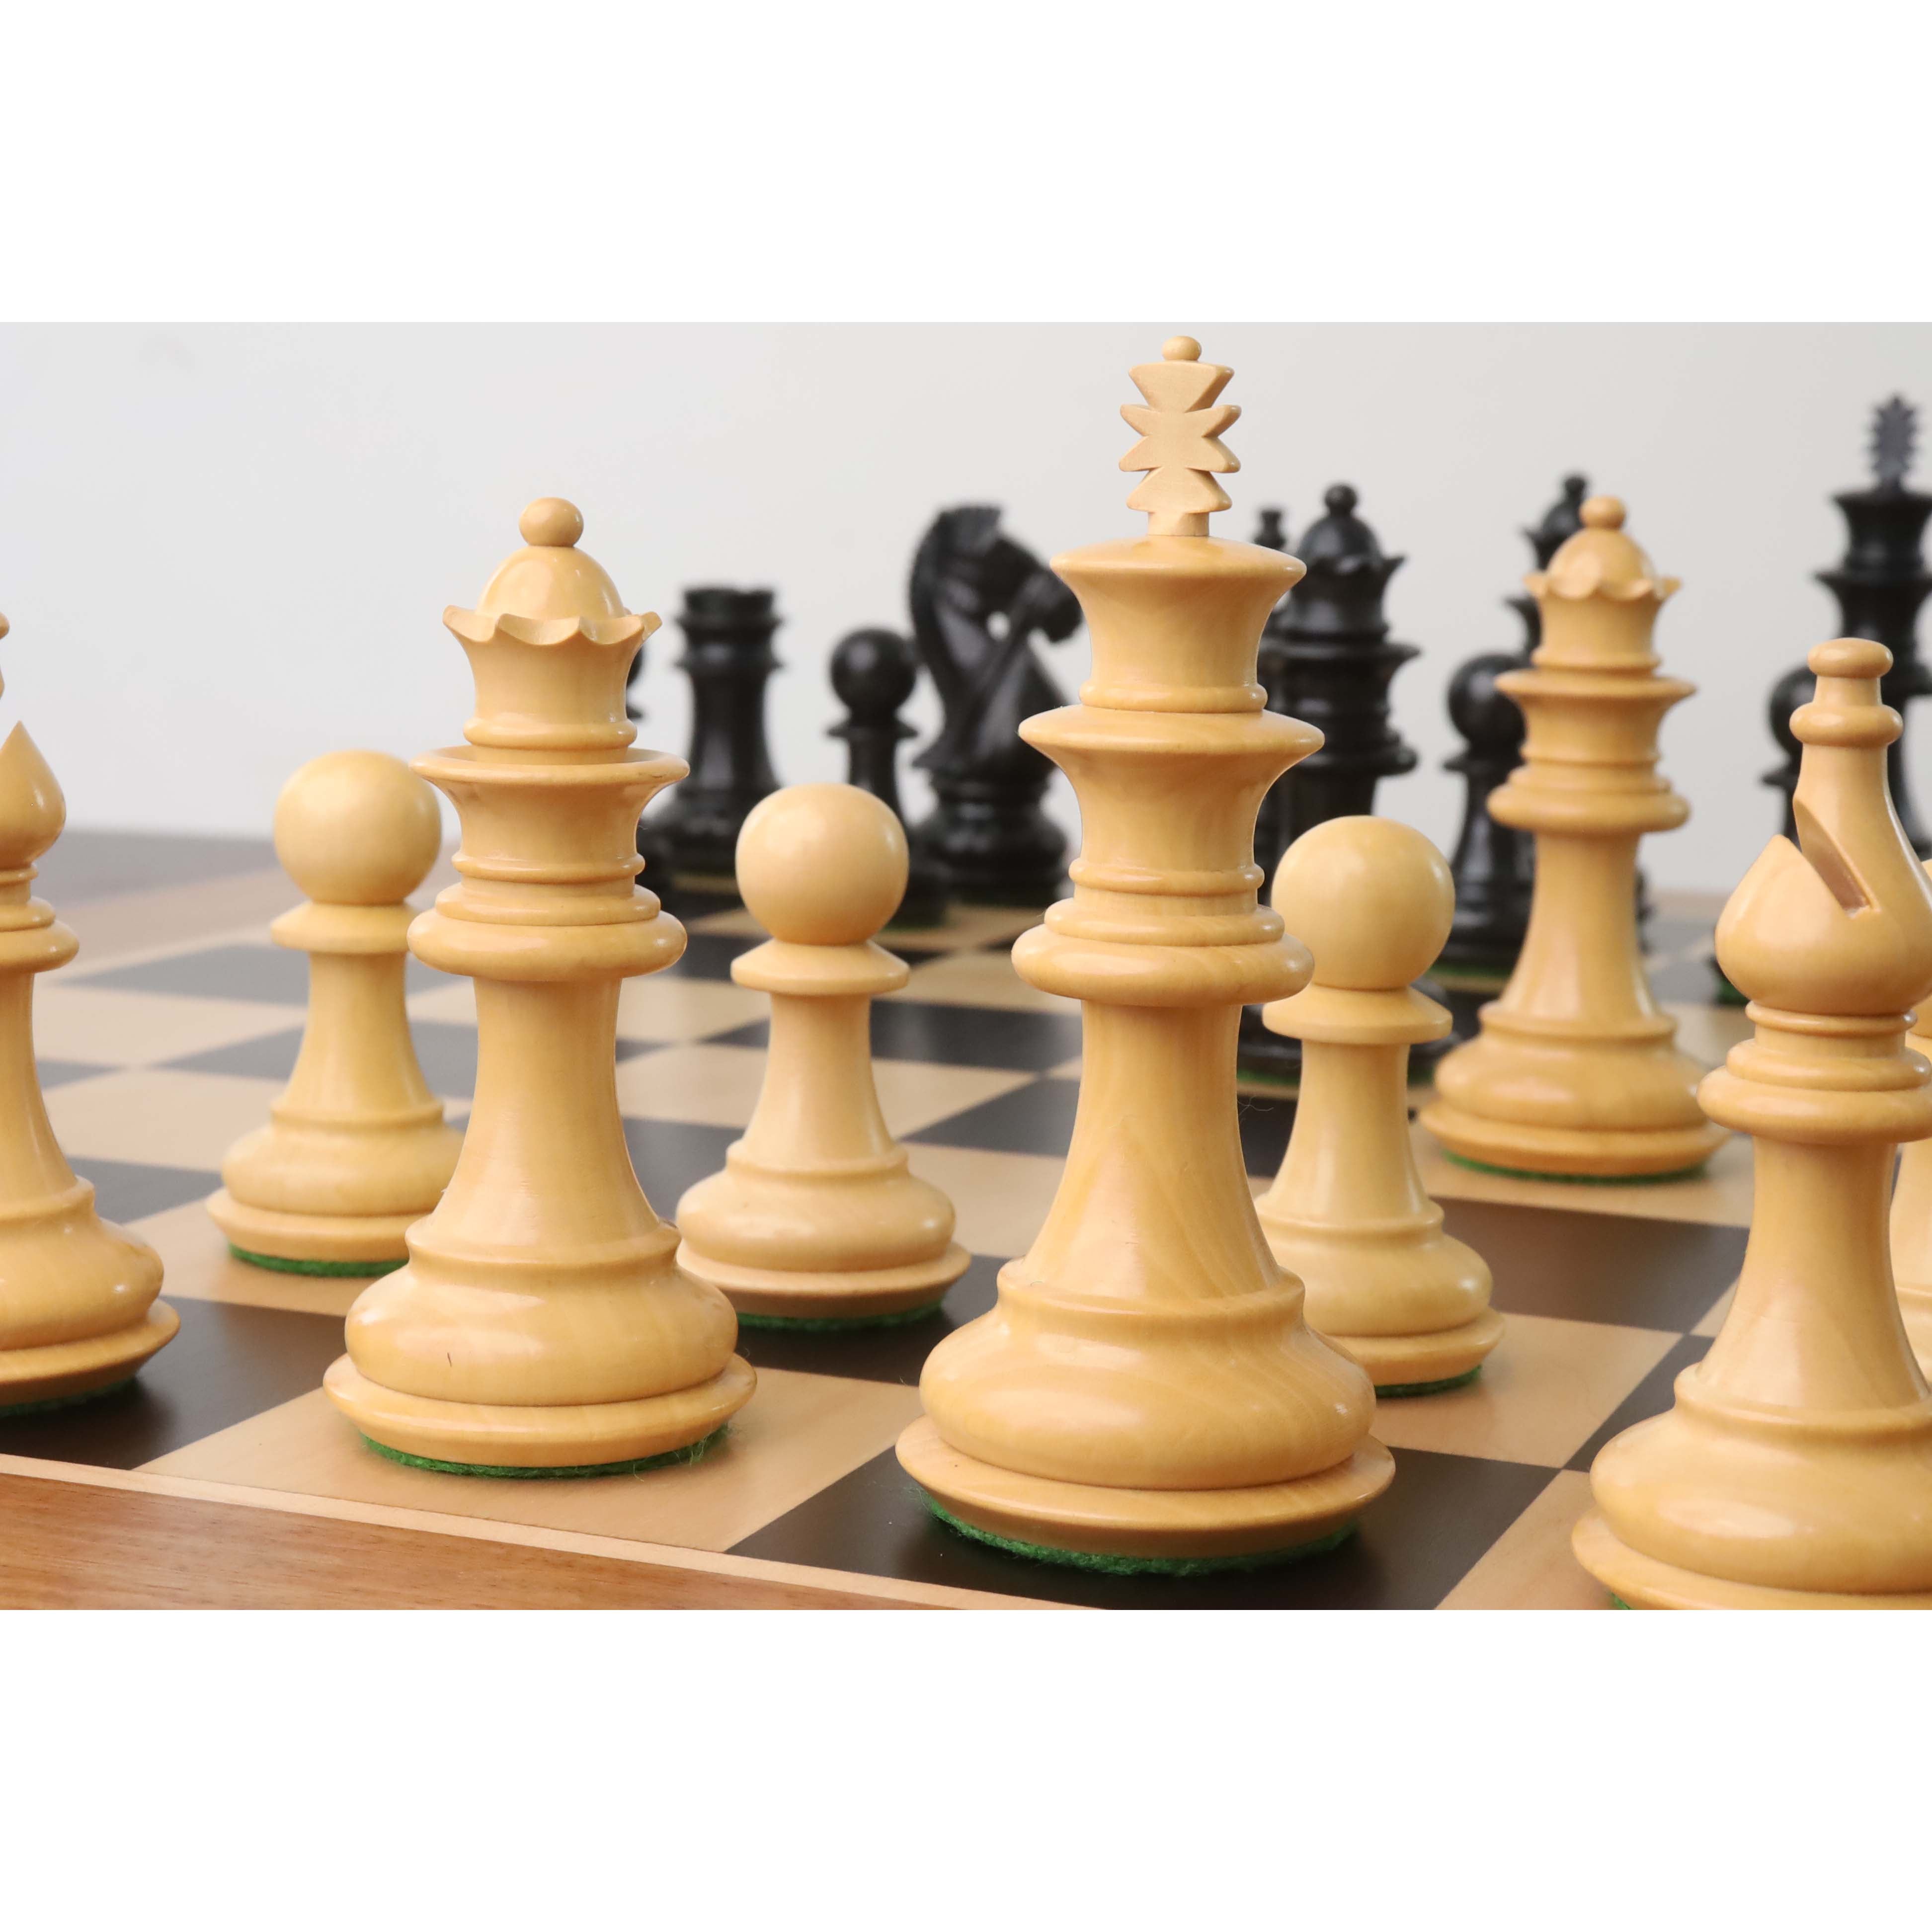 4.2" Supreme Luxury Series Staunton Chess Set- Chess Pieces Only - Weighted Boxwood